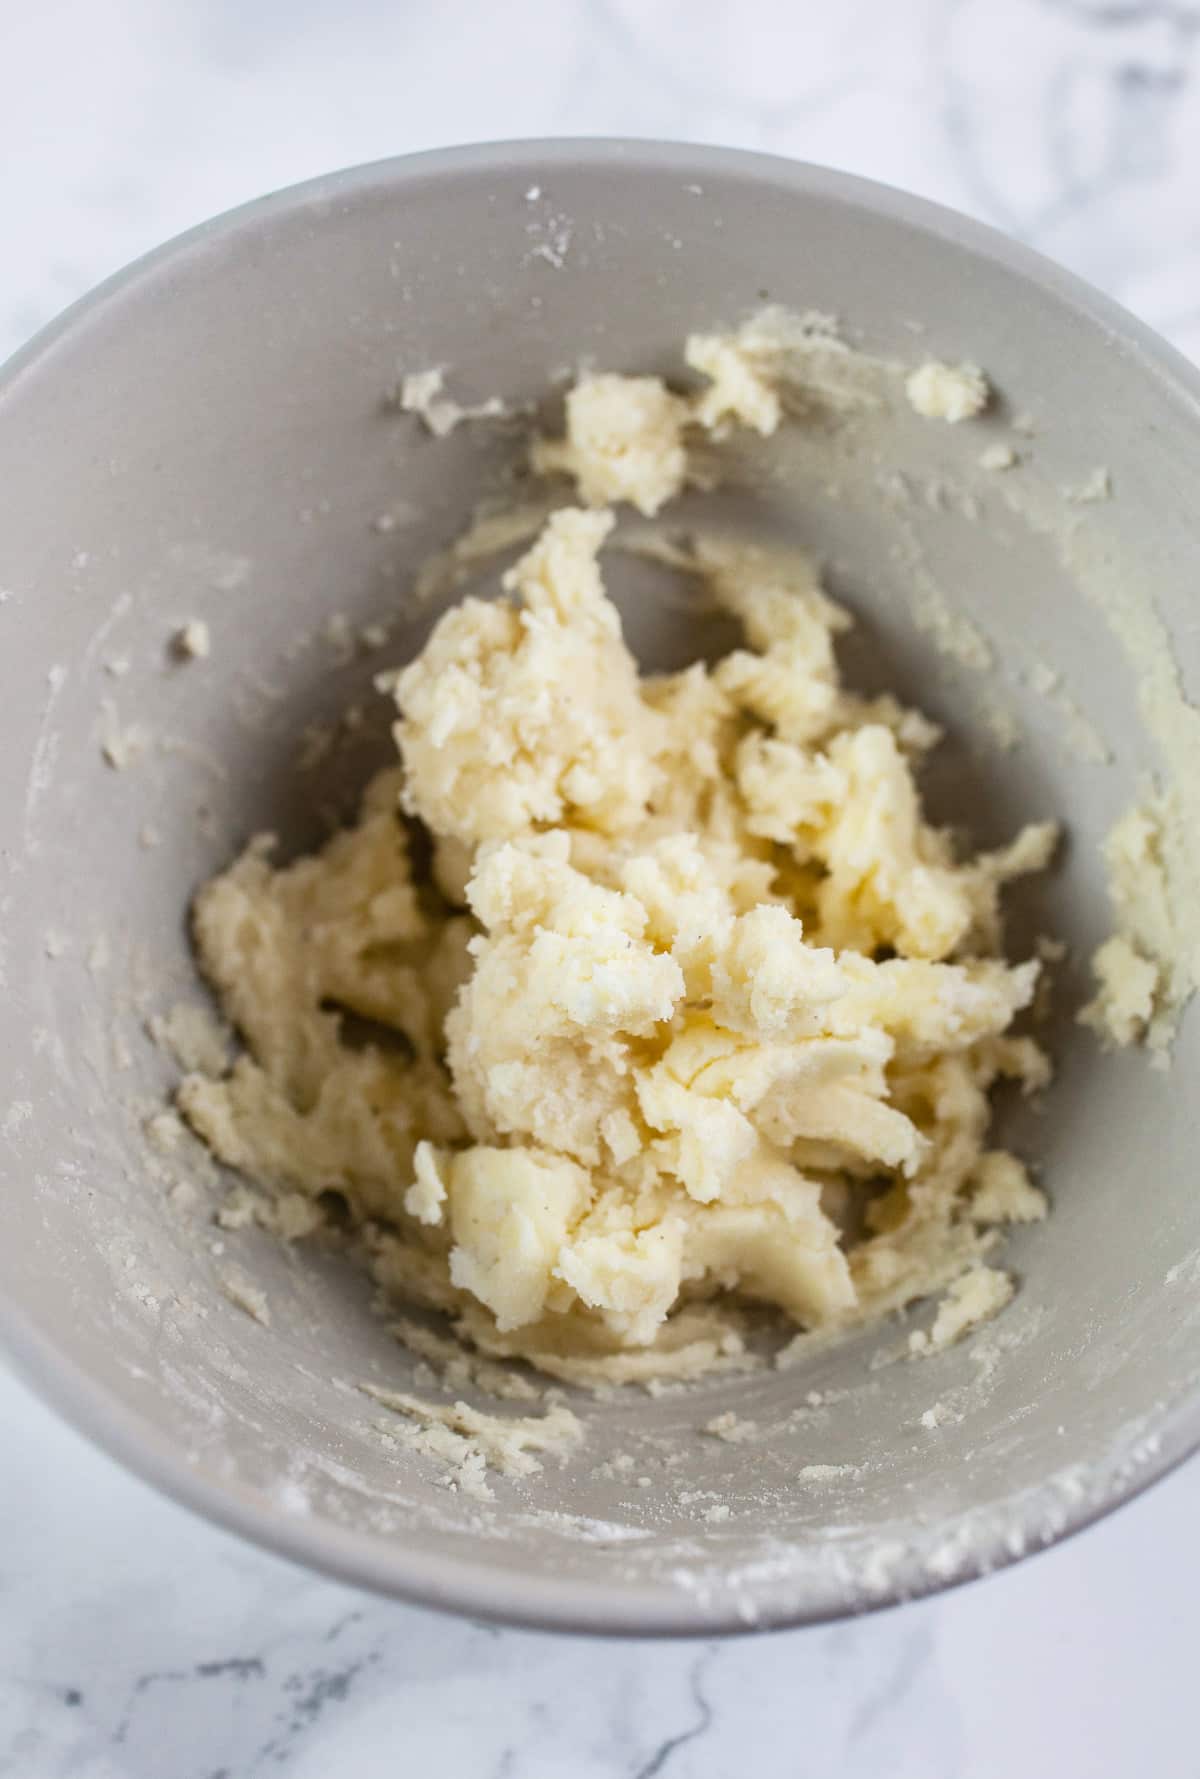 Flour and butter mixture in small grey bowl.